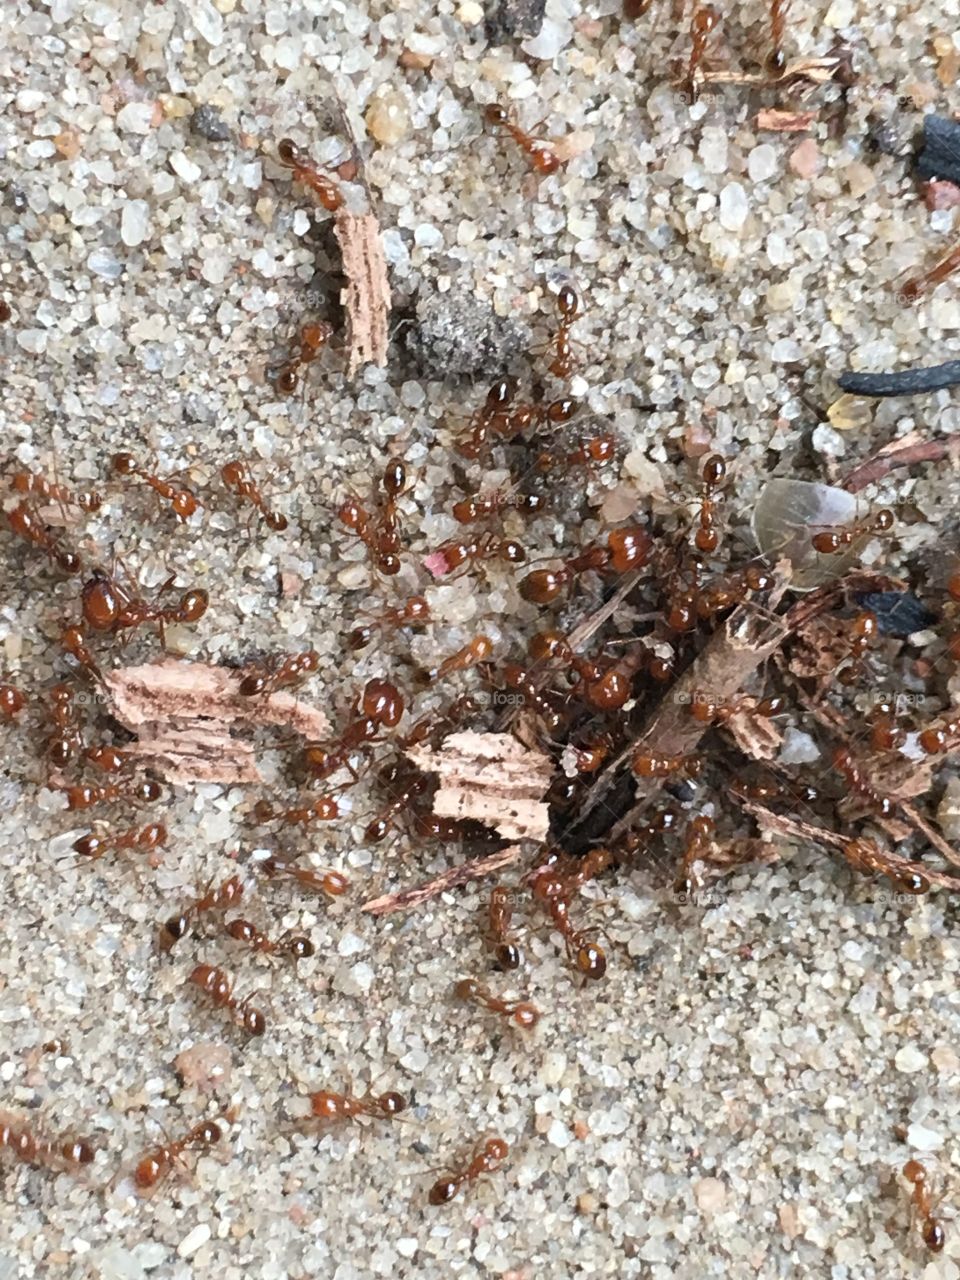 Ants saving there foods cause rain 🌧 season will be started